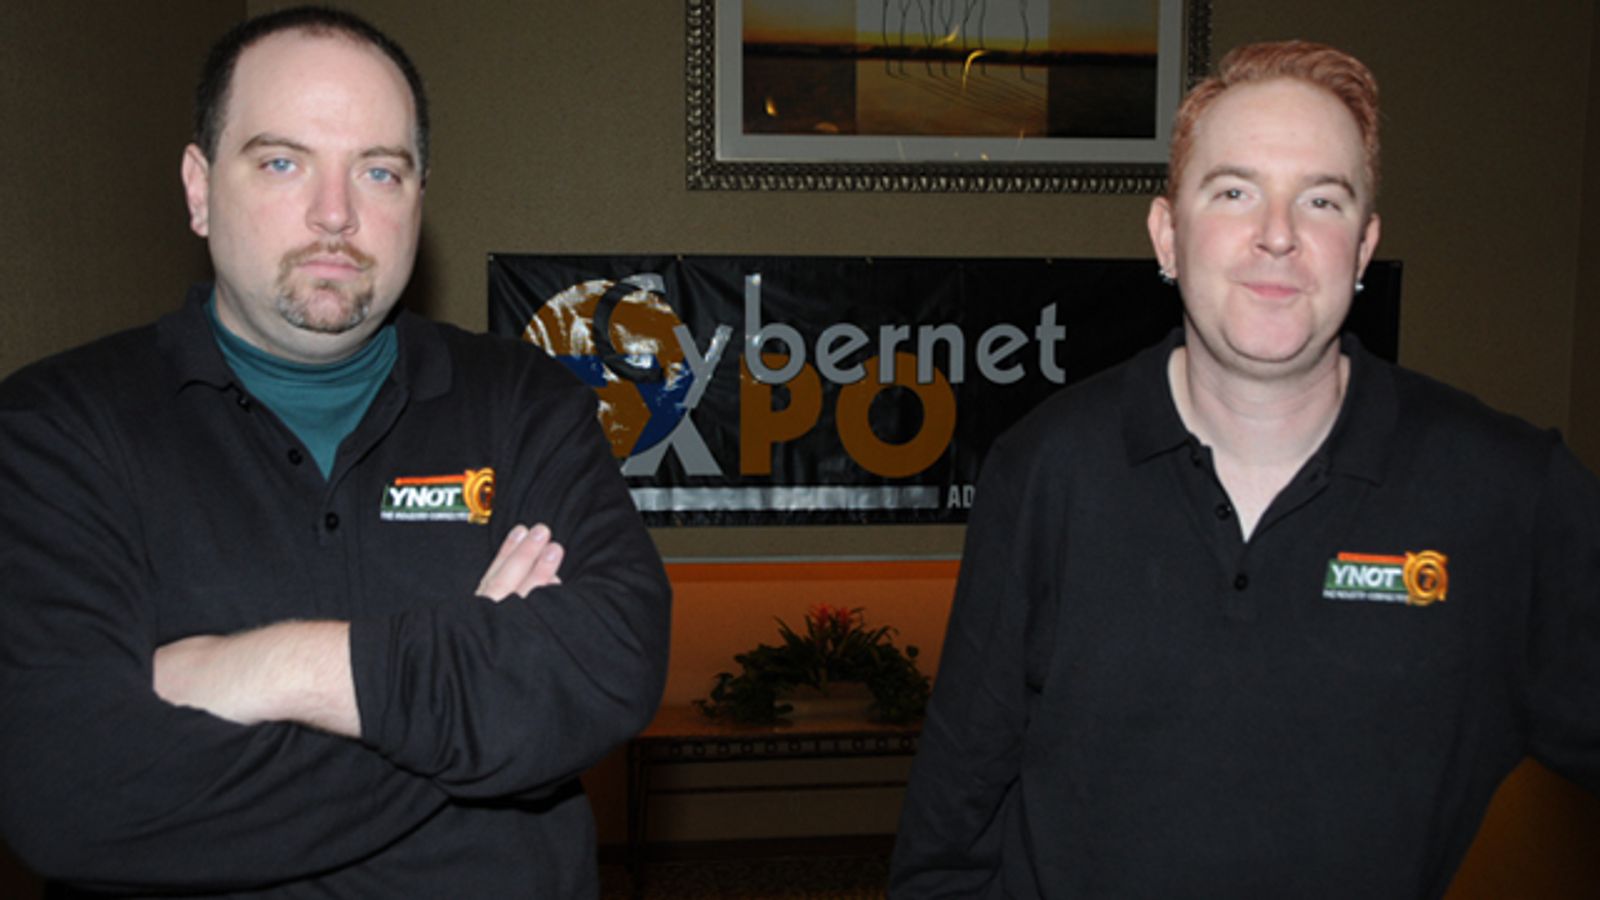 Cybernet Expo Thrives